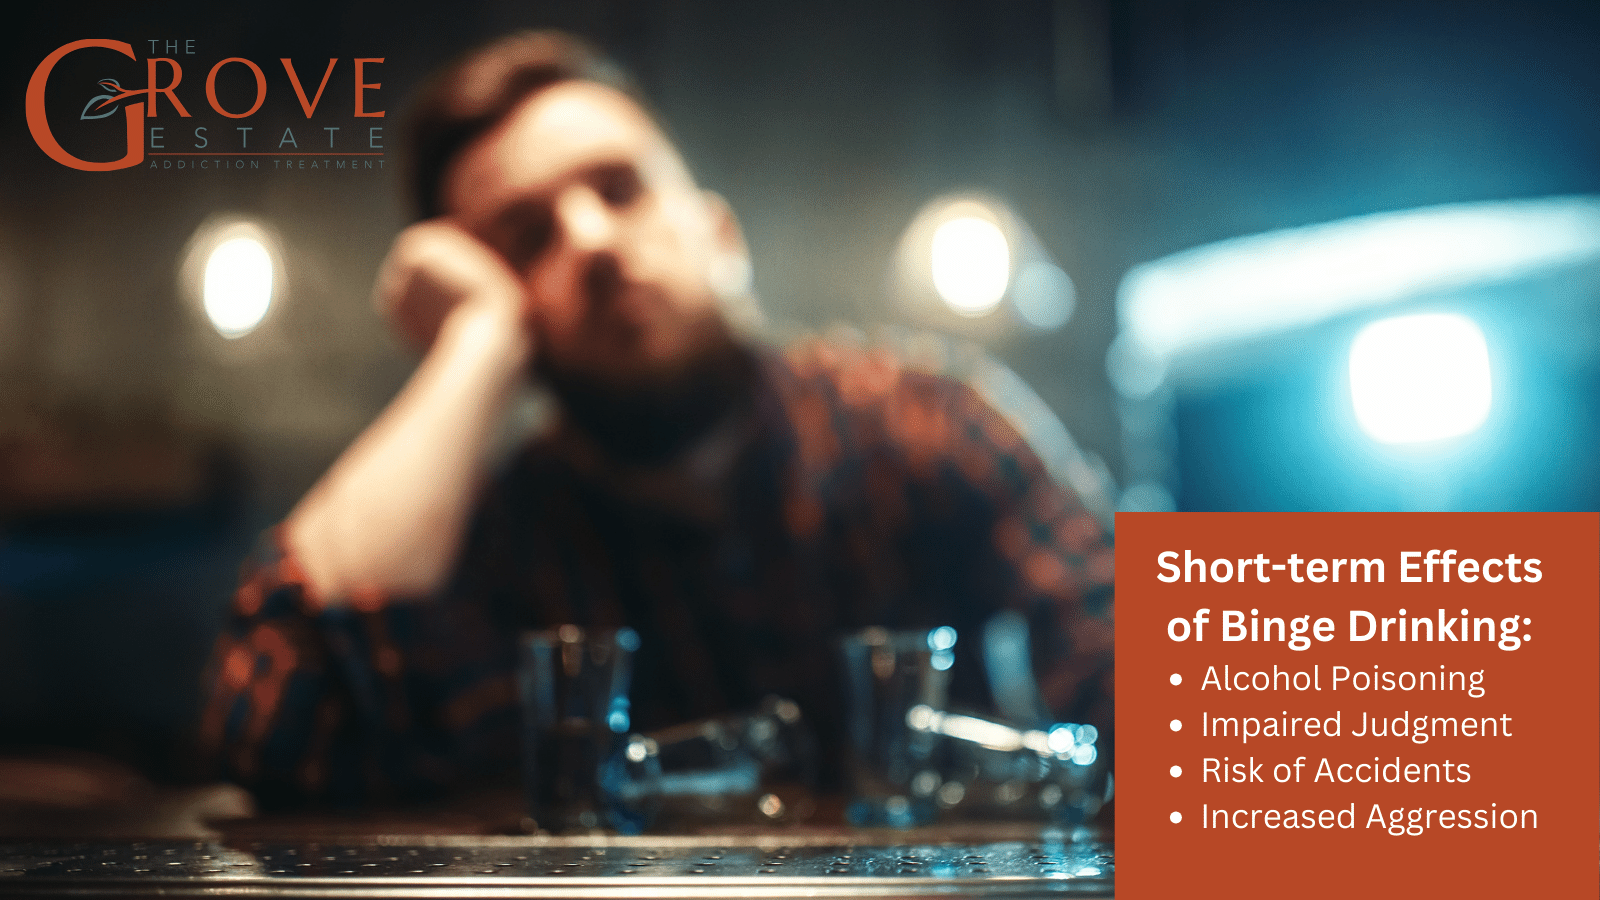 What are the Short-term Health Effects of Binge Drinking?